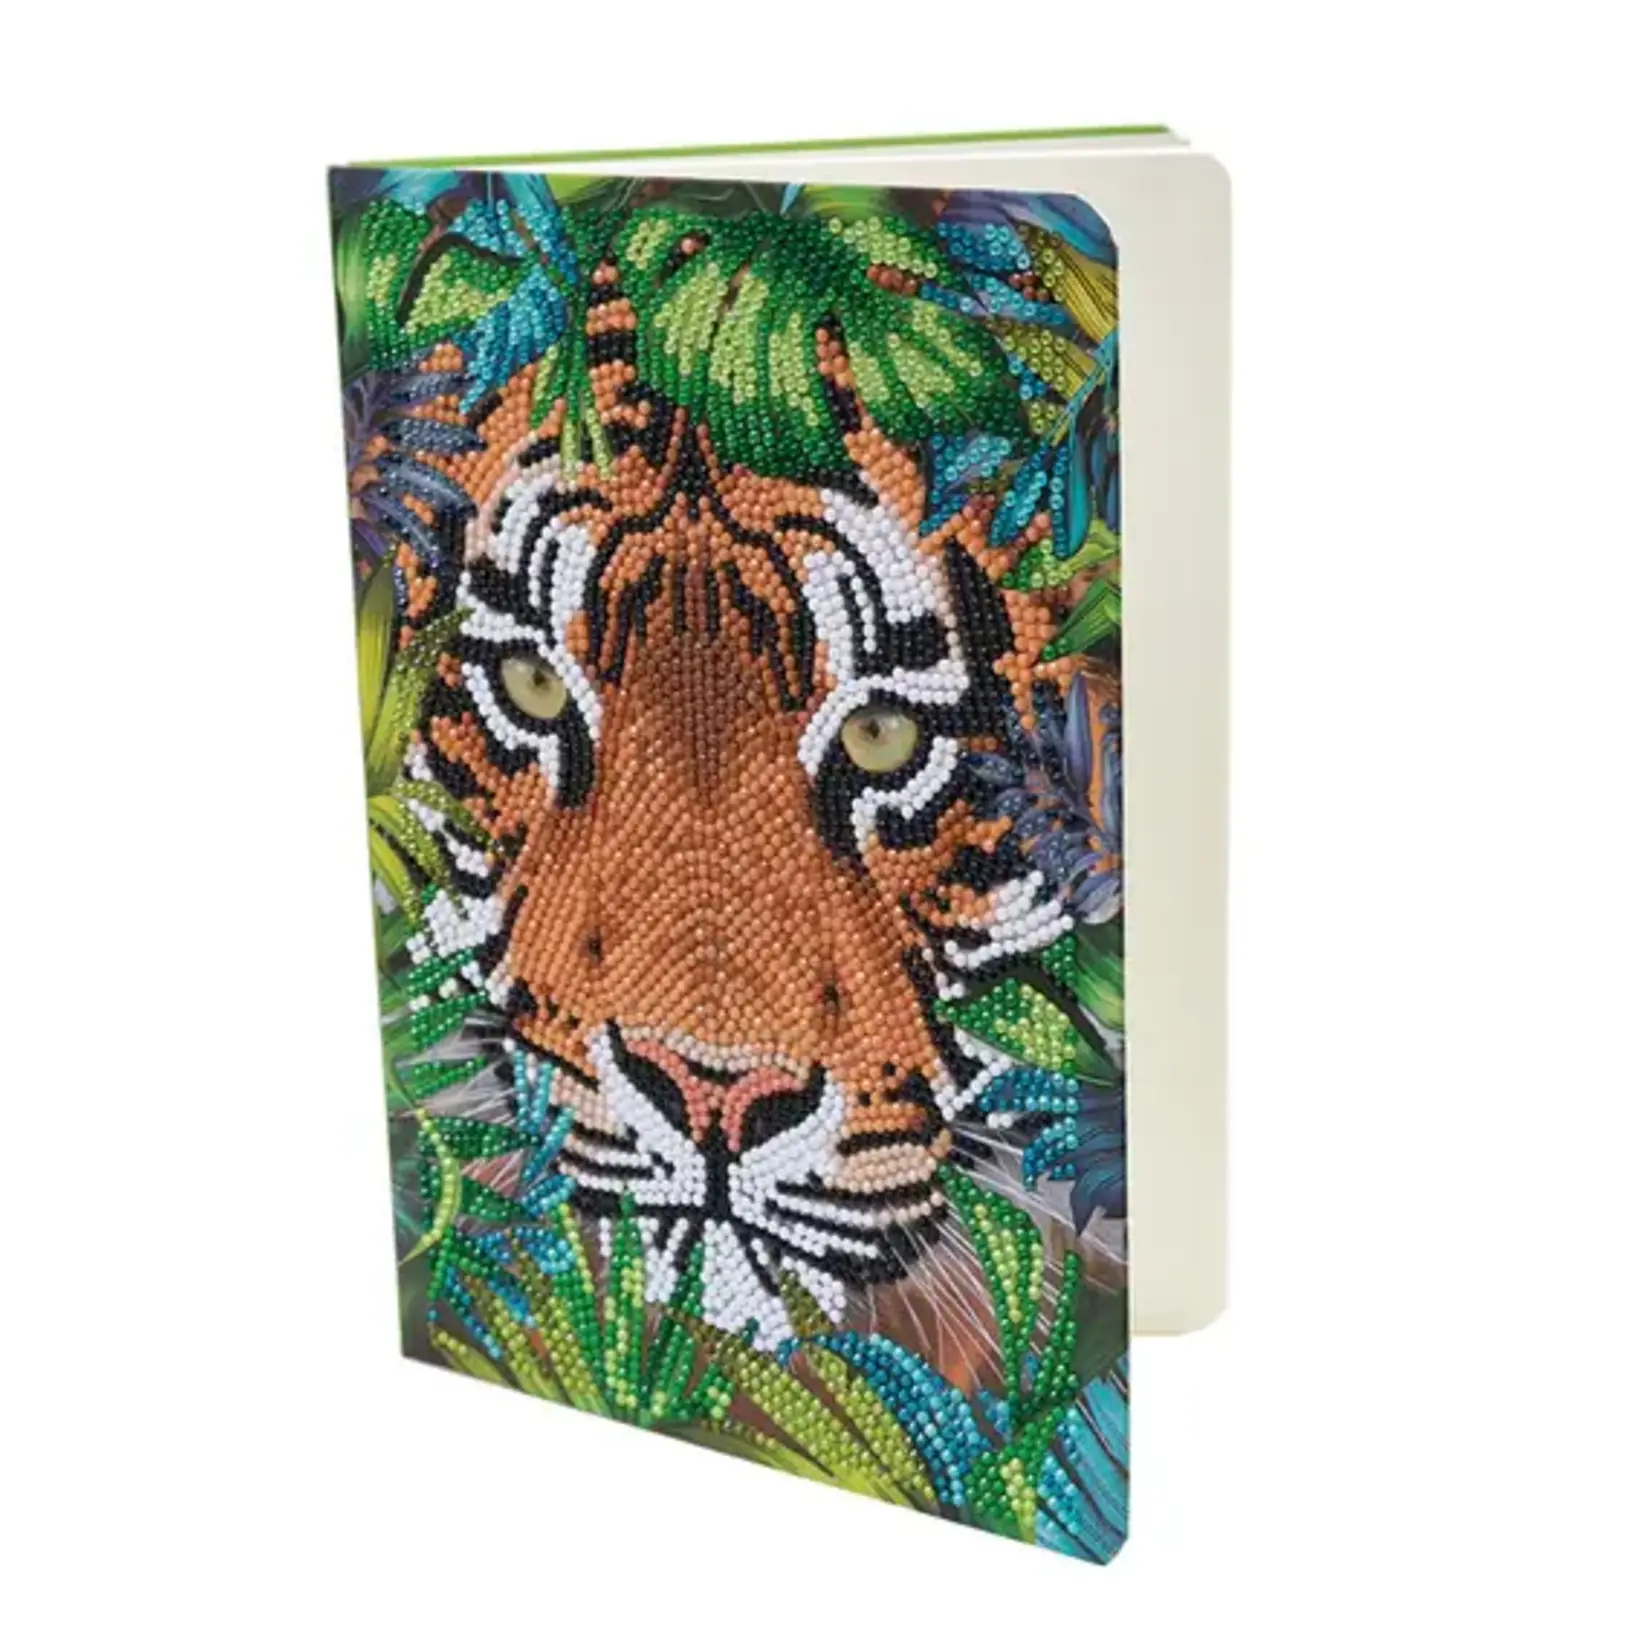 Cobble Hill: Crystal Art Notebook - Tiger in the Forest - Phoenix Fire Games